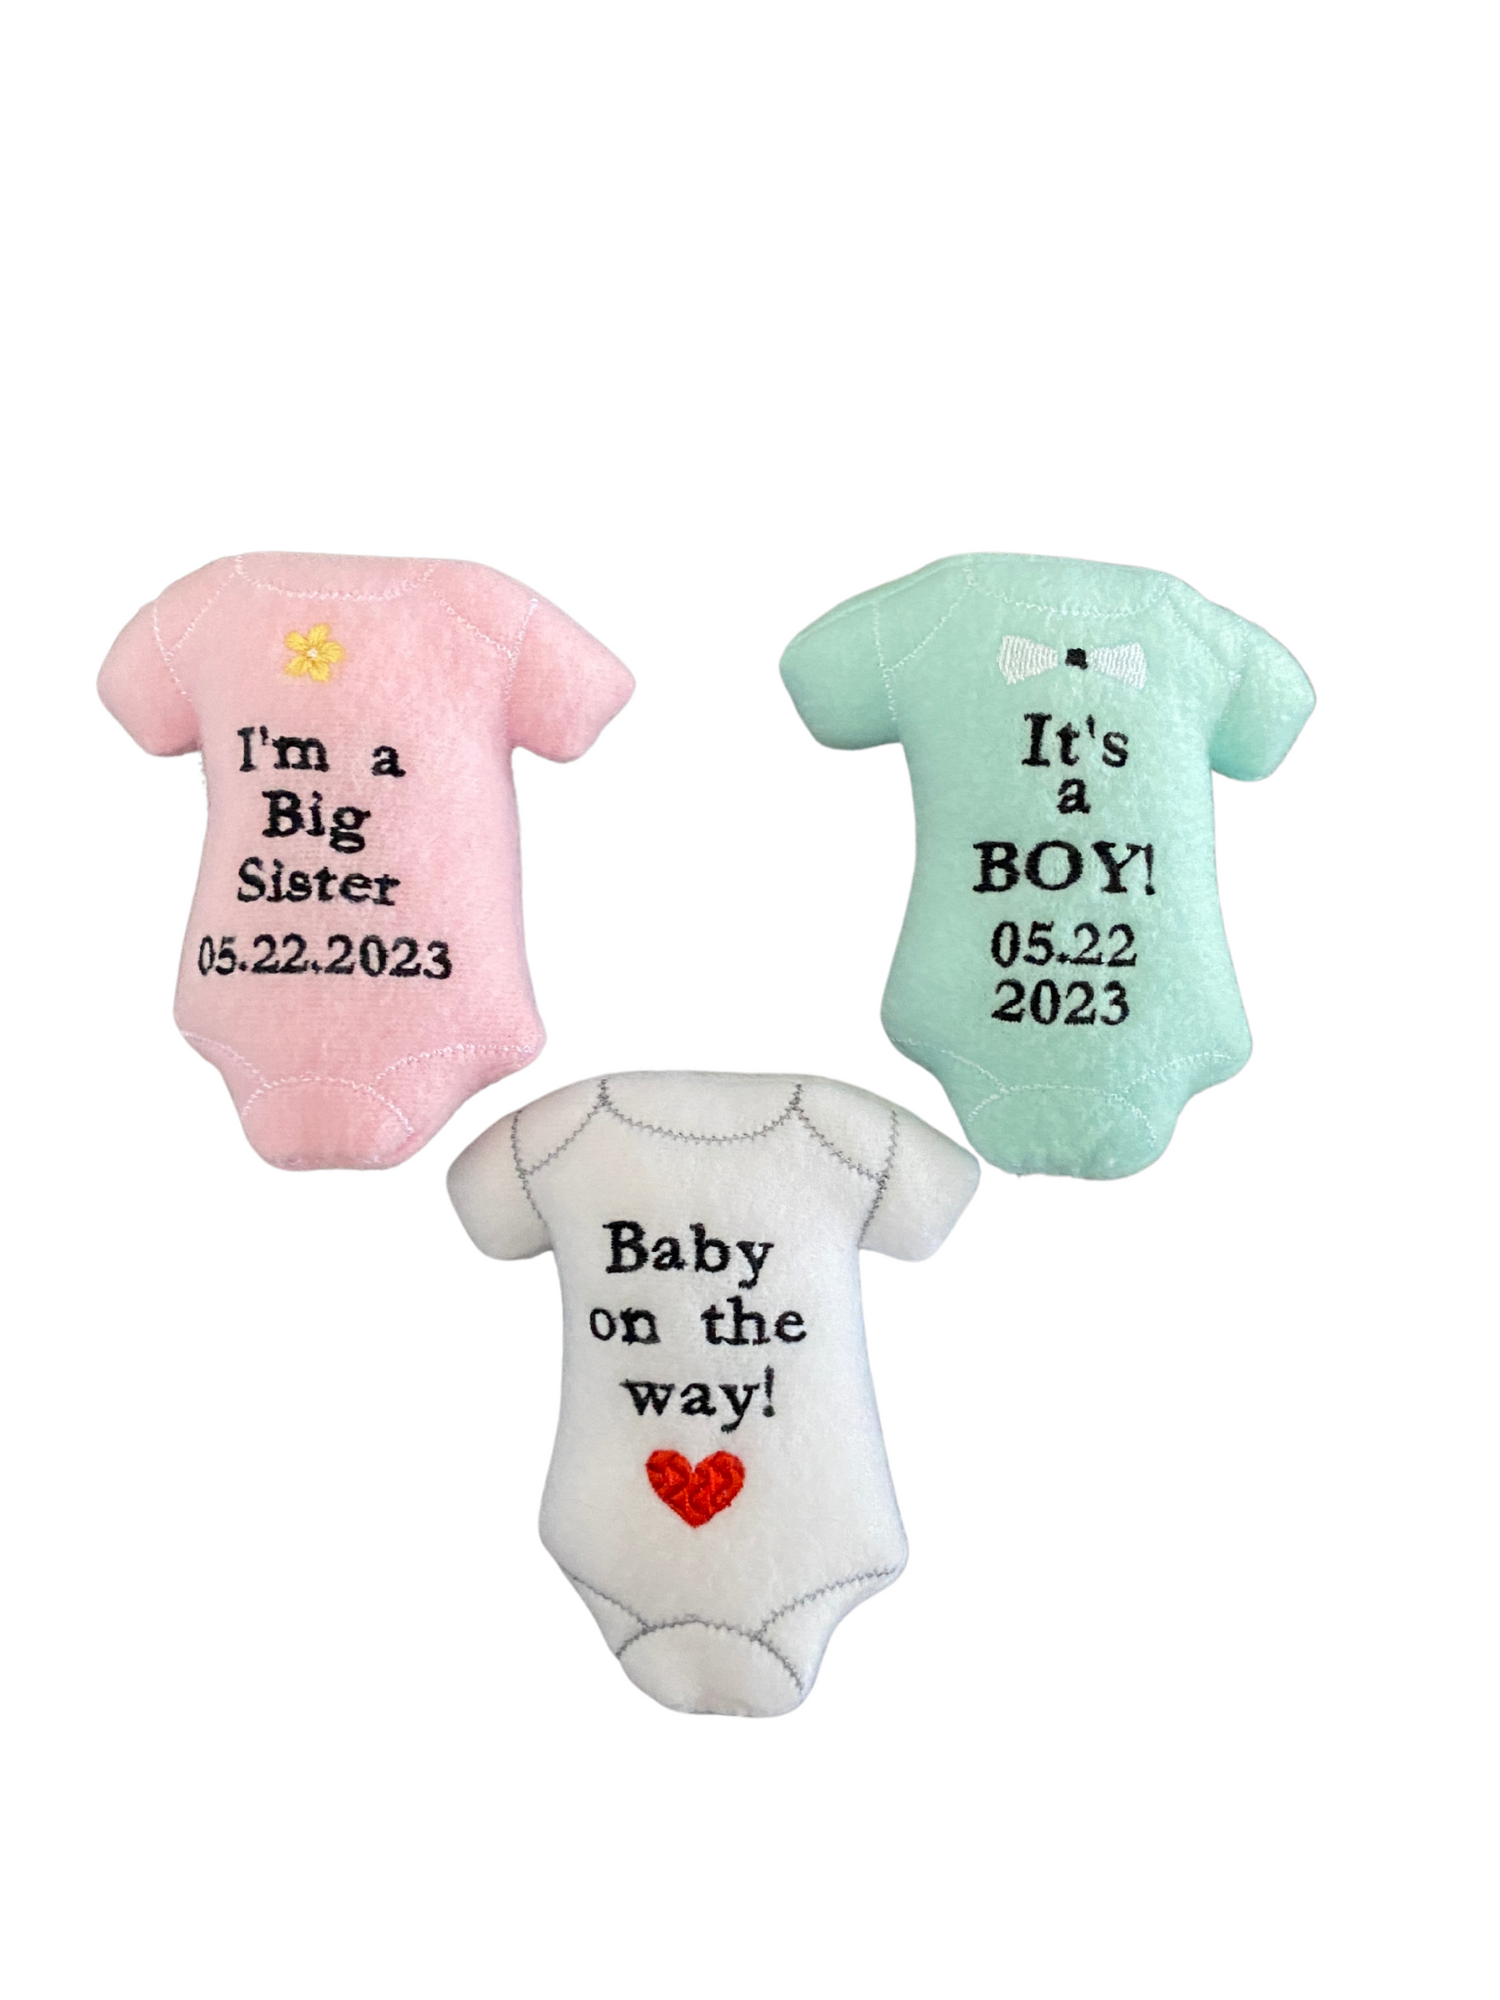 Baby Announcement and Engagement Cat Toys